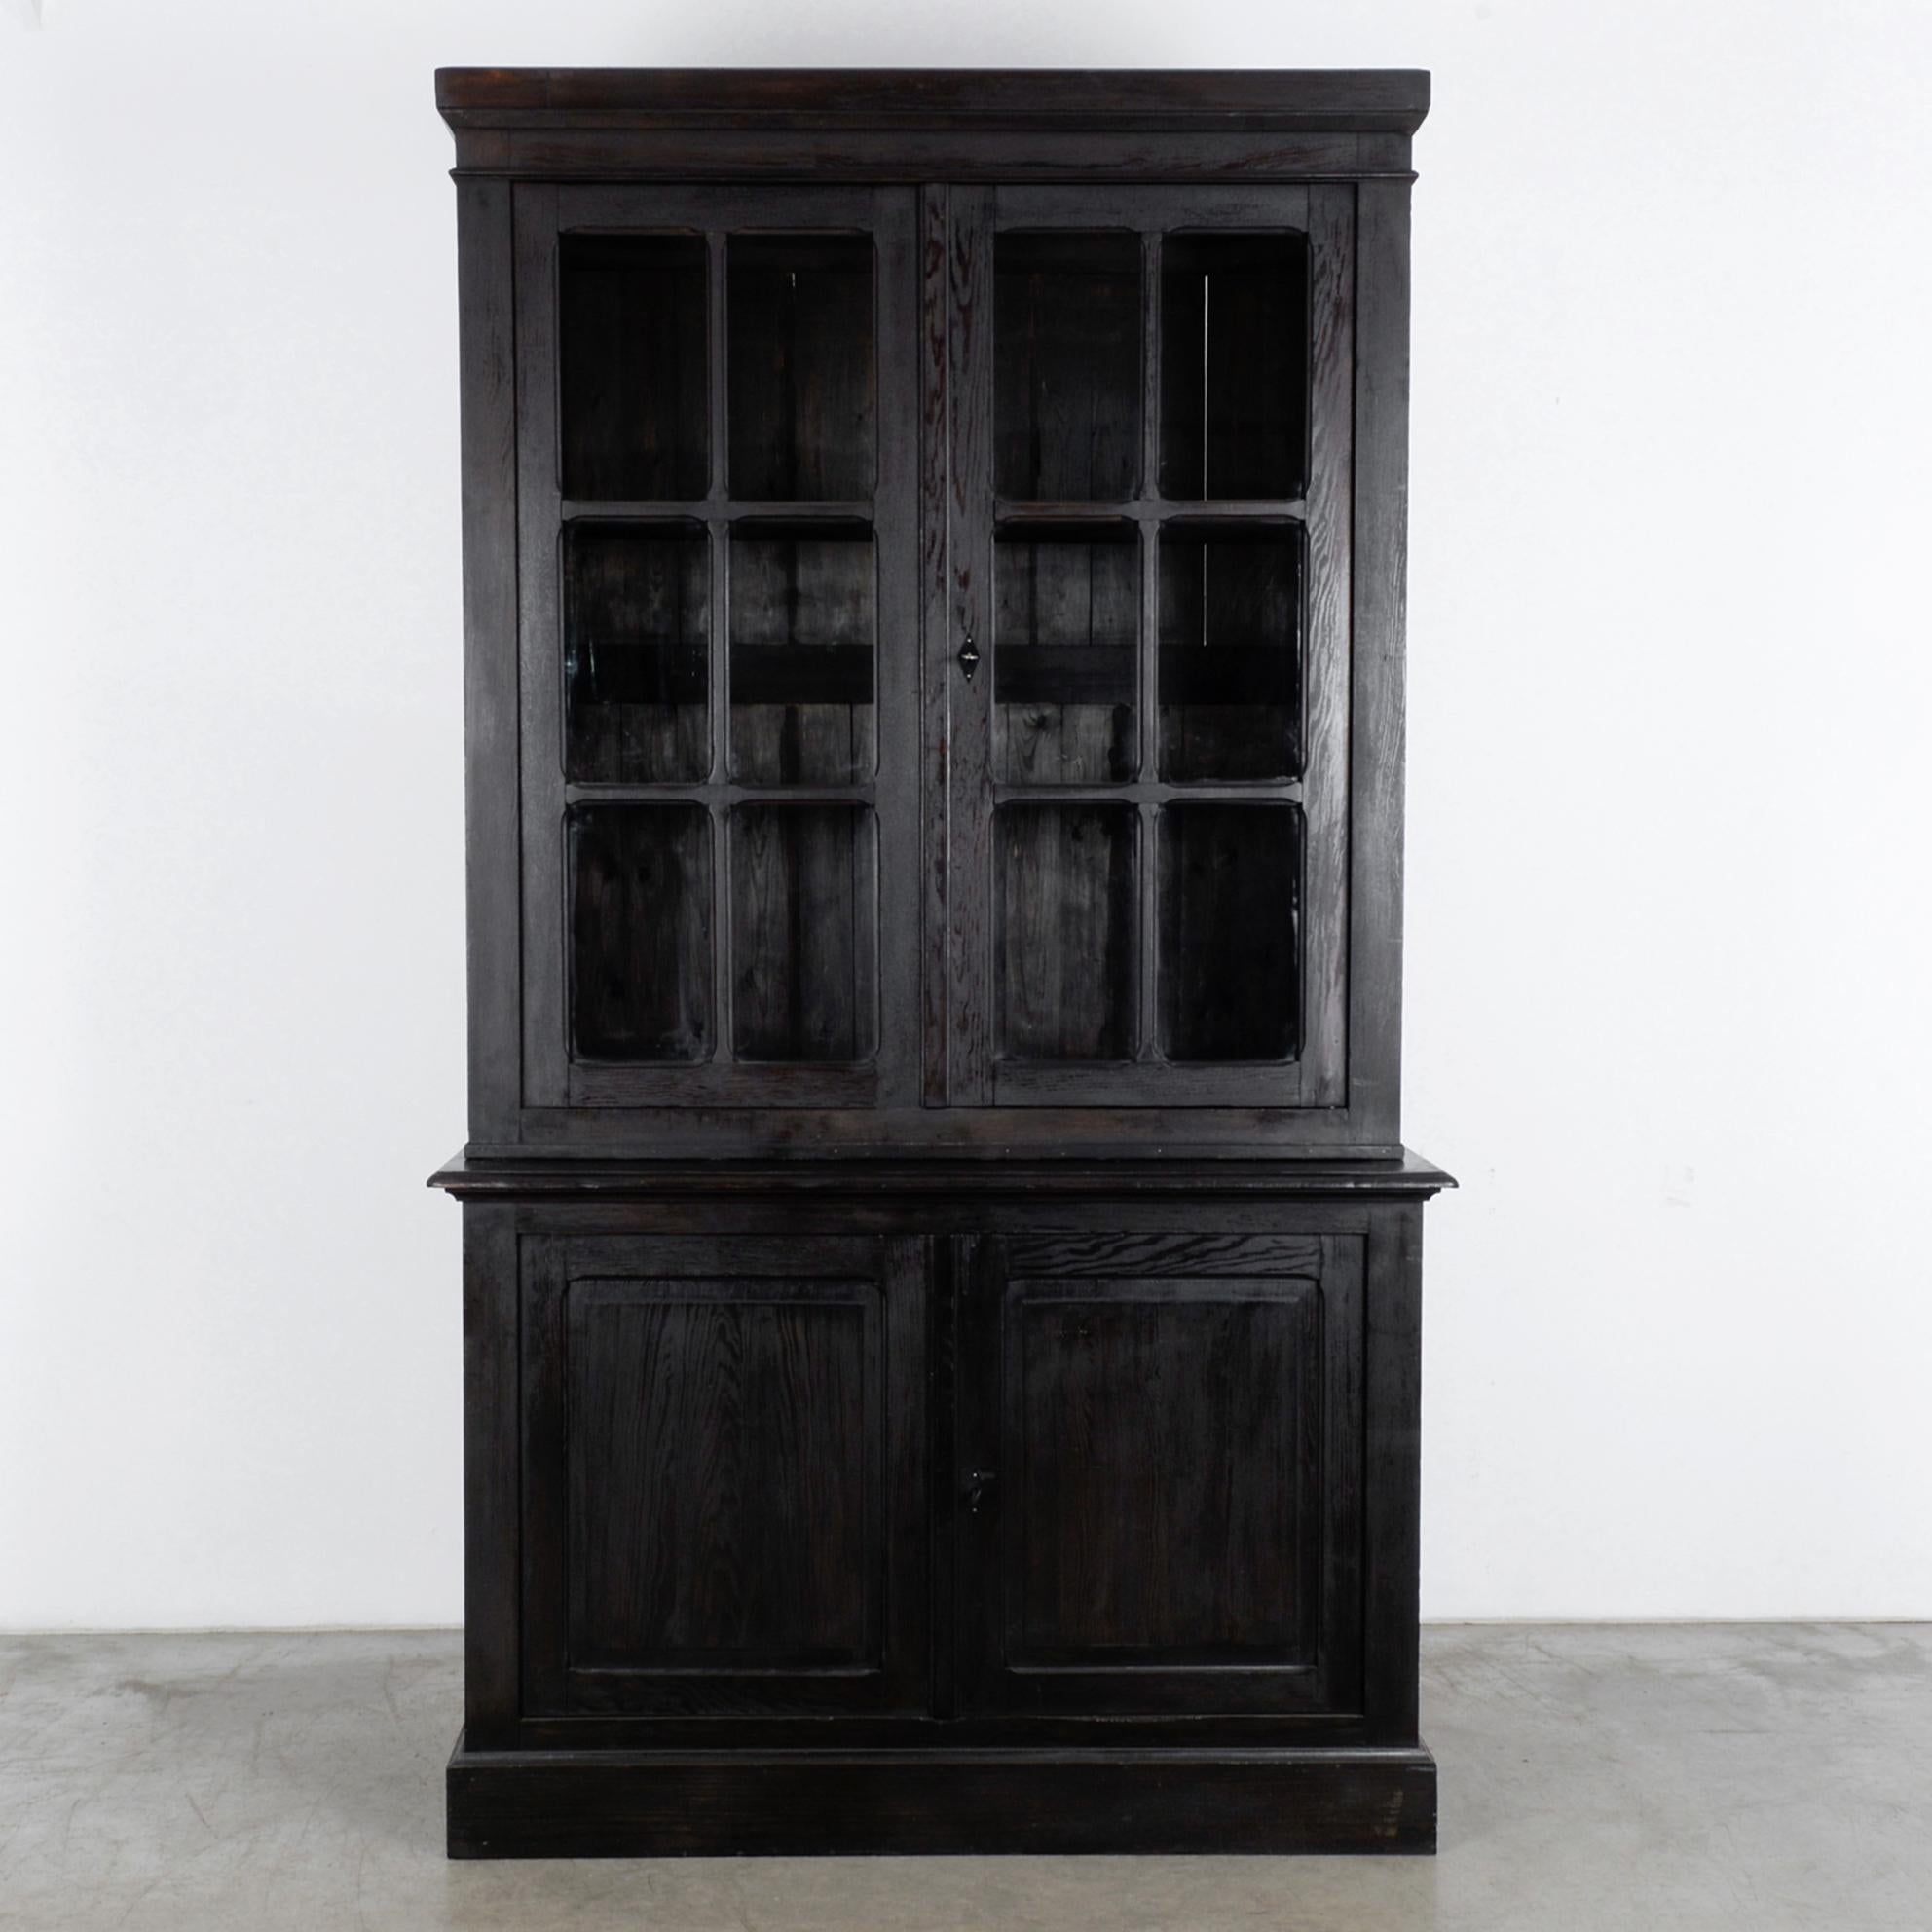 A black wooden vitrine from Belgium, circa 1900. A tall display case atop a cupboard is fronted by paned windows, which open onto two interior shelves. The wood is painted an inky black, for a sophisticated Gothic effect; the polished finish has the